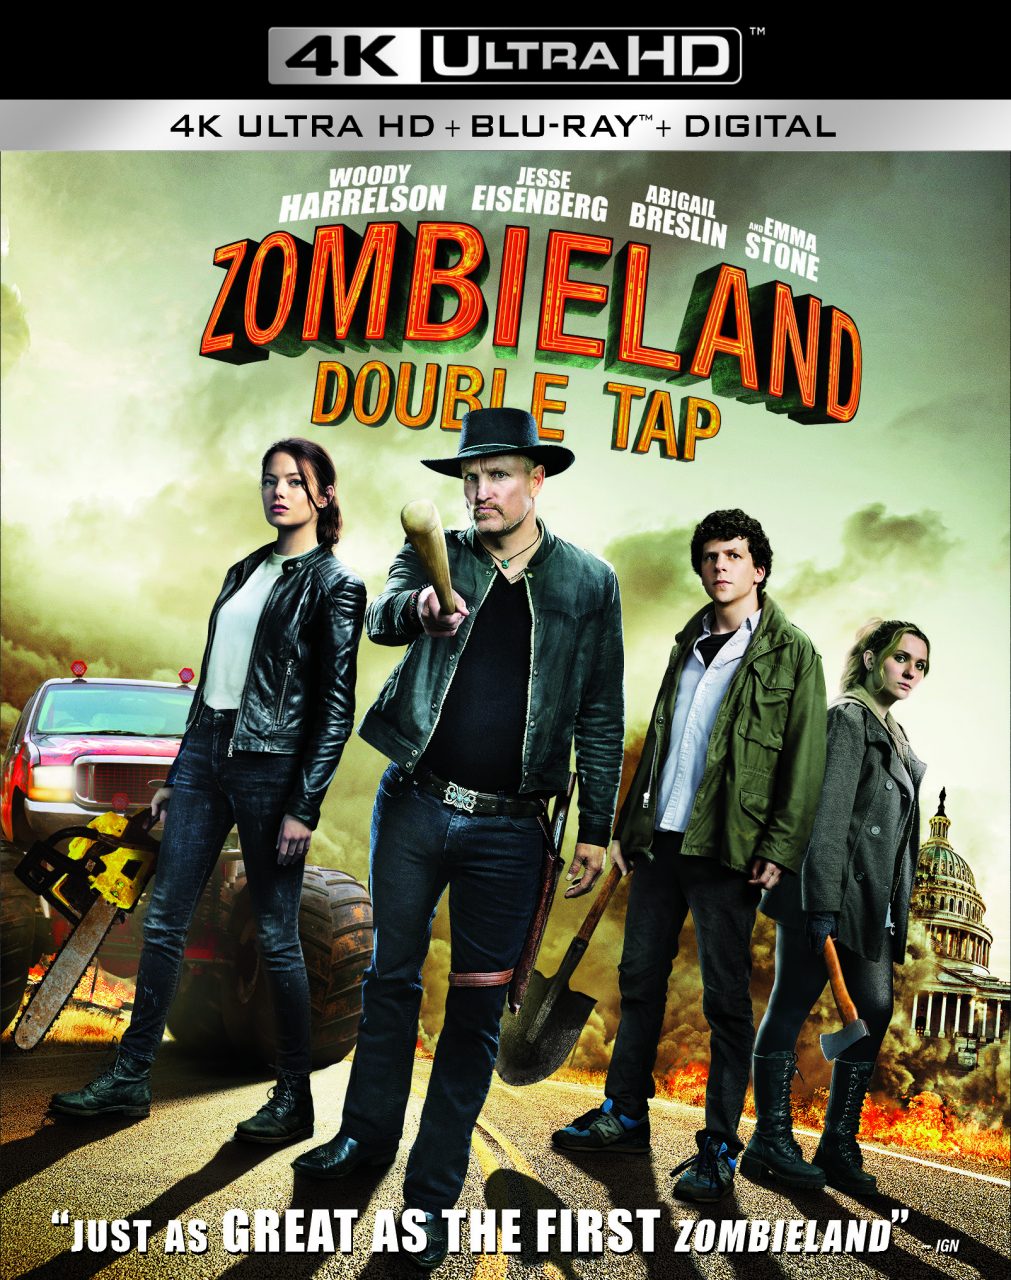 Zombieland: Double Tap 4K Ultra HD Combo Pack cover (Sony Pictures Home Entertainment)